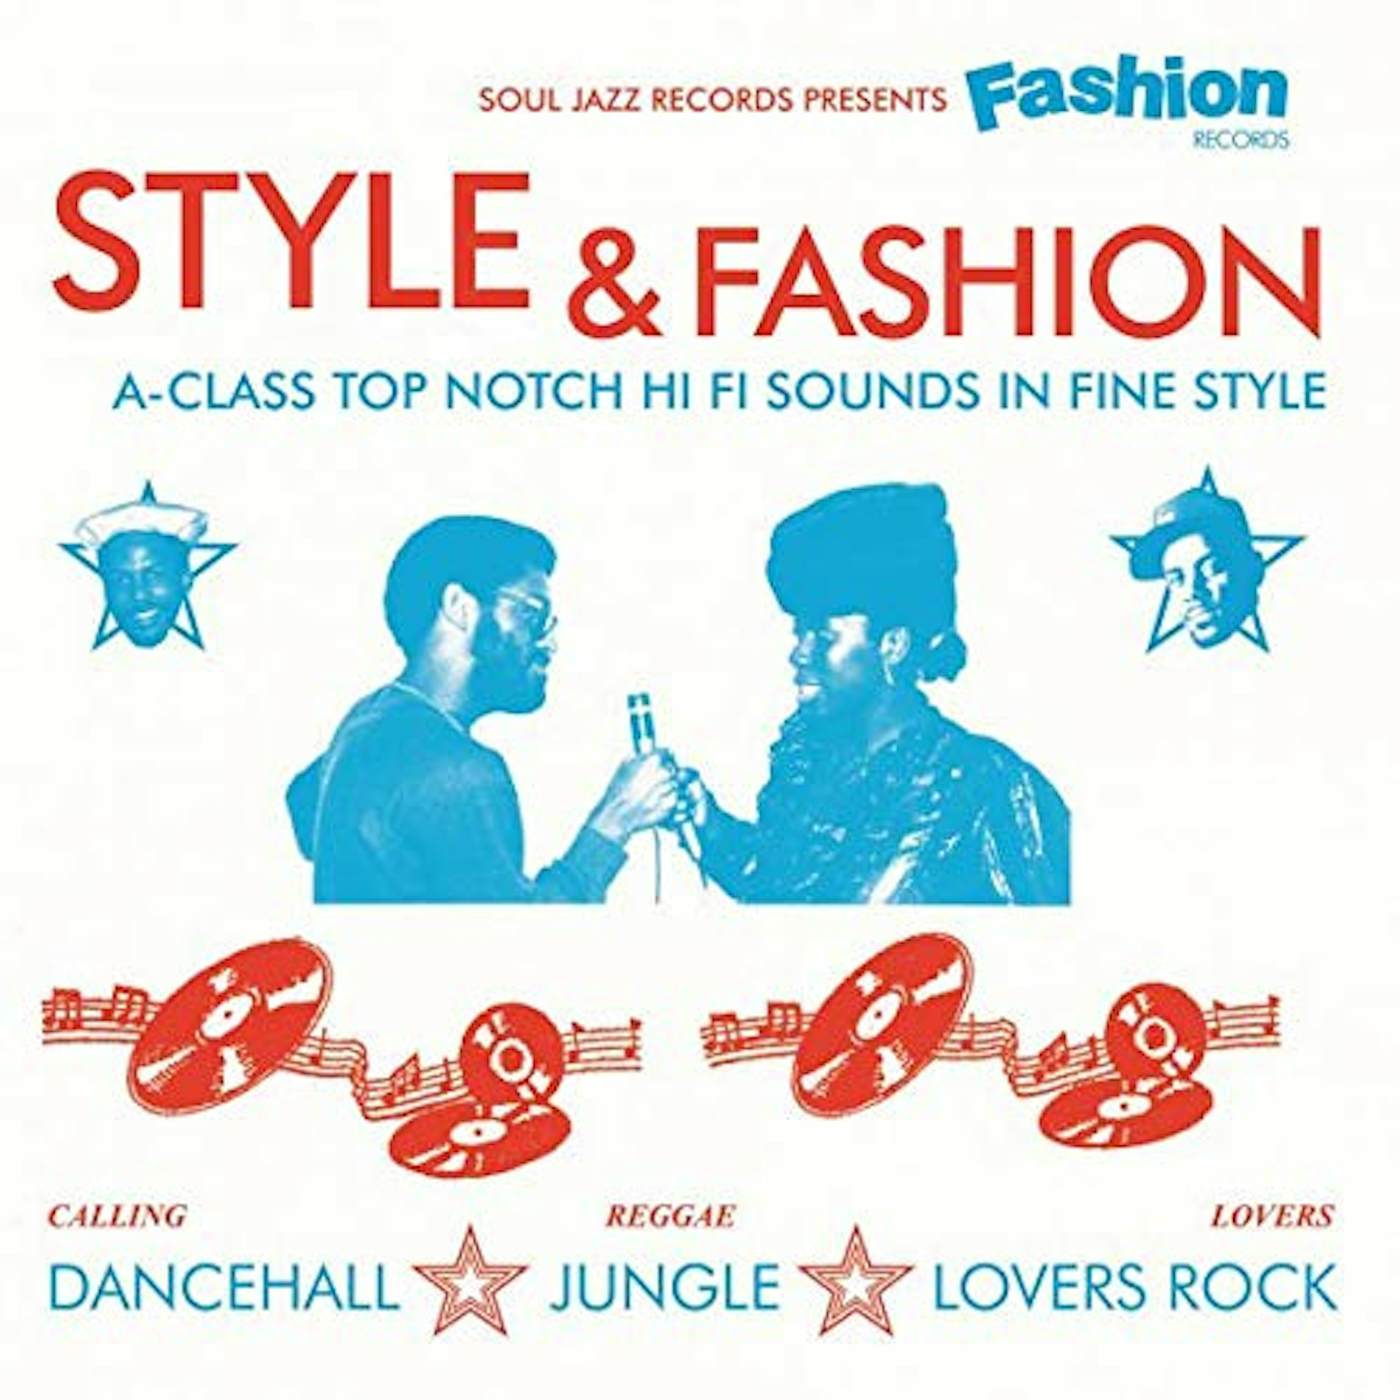 General Levy / Laurel & Hardy / Cutty Ranks SOUL JAZZ RECORDS PRESENTS FASHION RECORDS CD